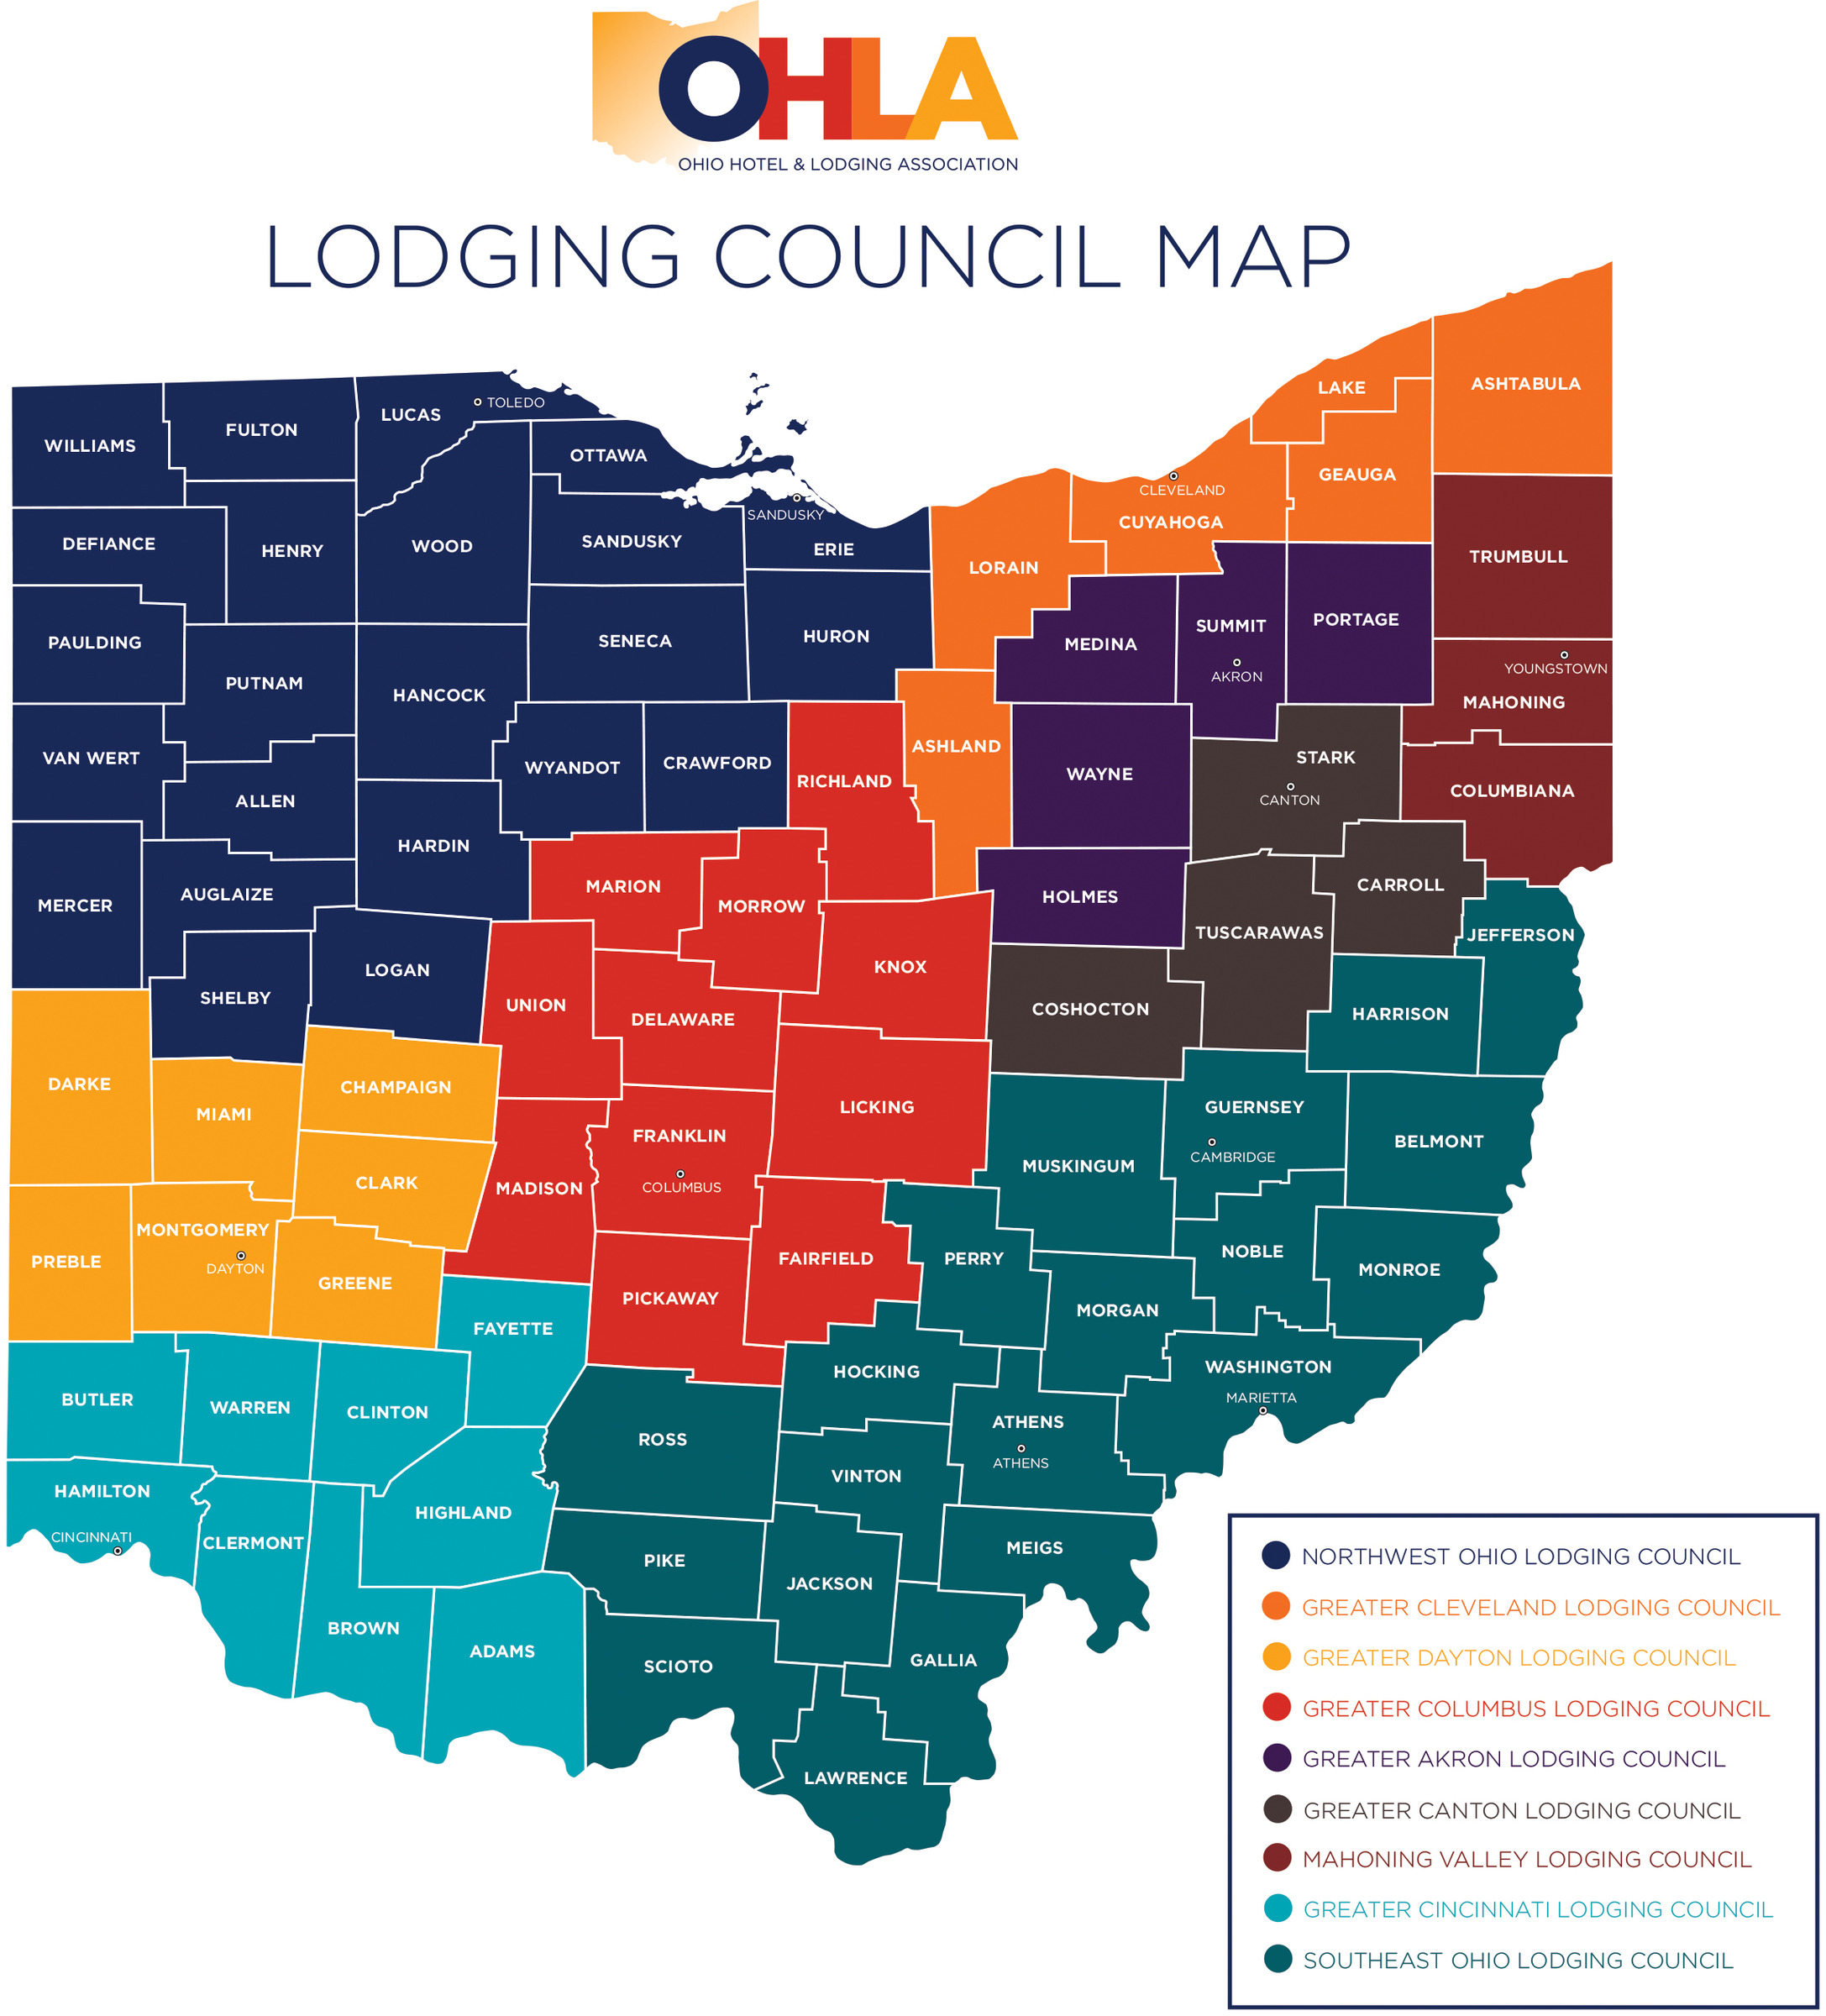 New OHLA Lodging Council Map